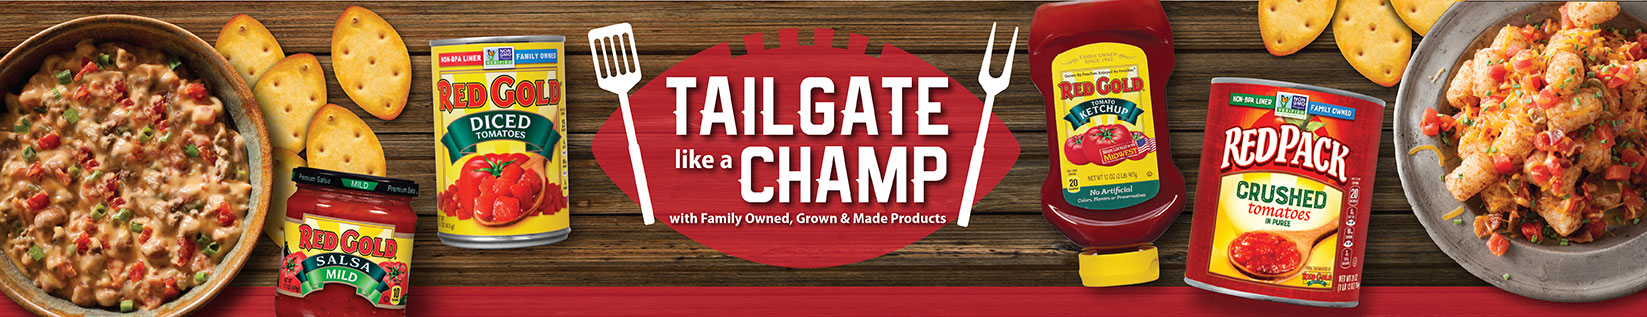 Image of Red Gold Tailgate recipes featuring canned tomato products from Red Gold and Redpack